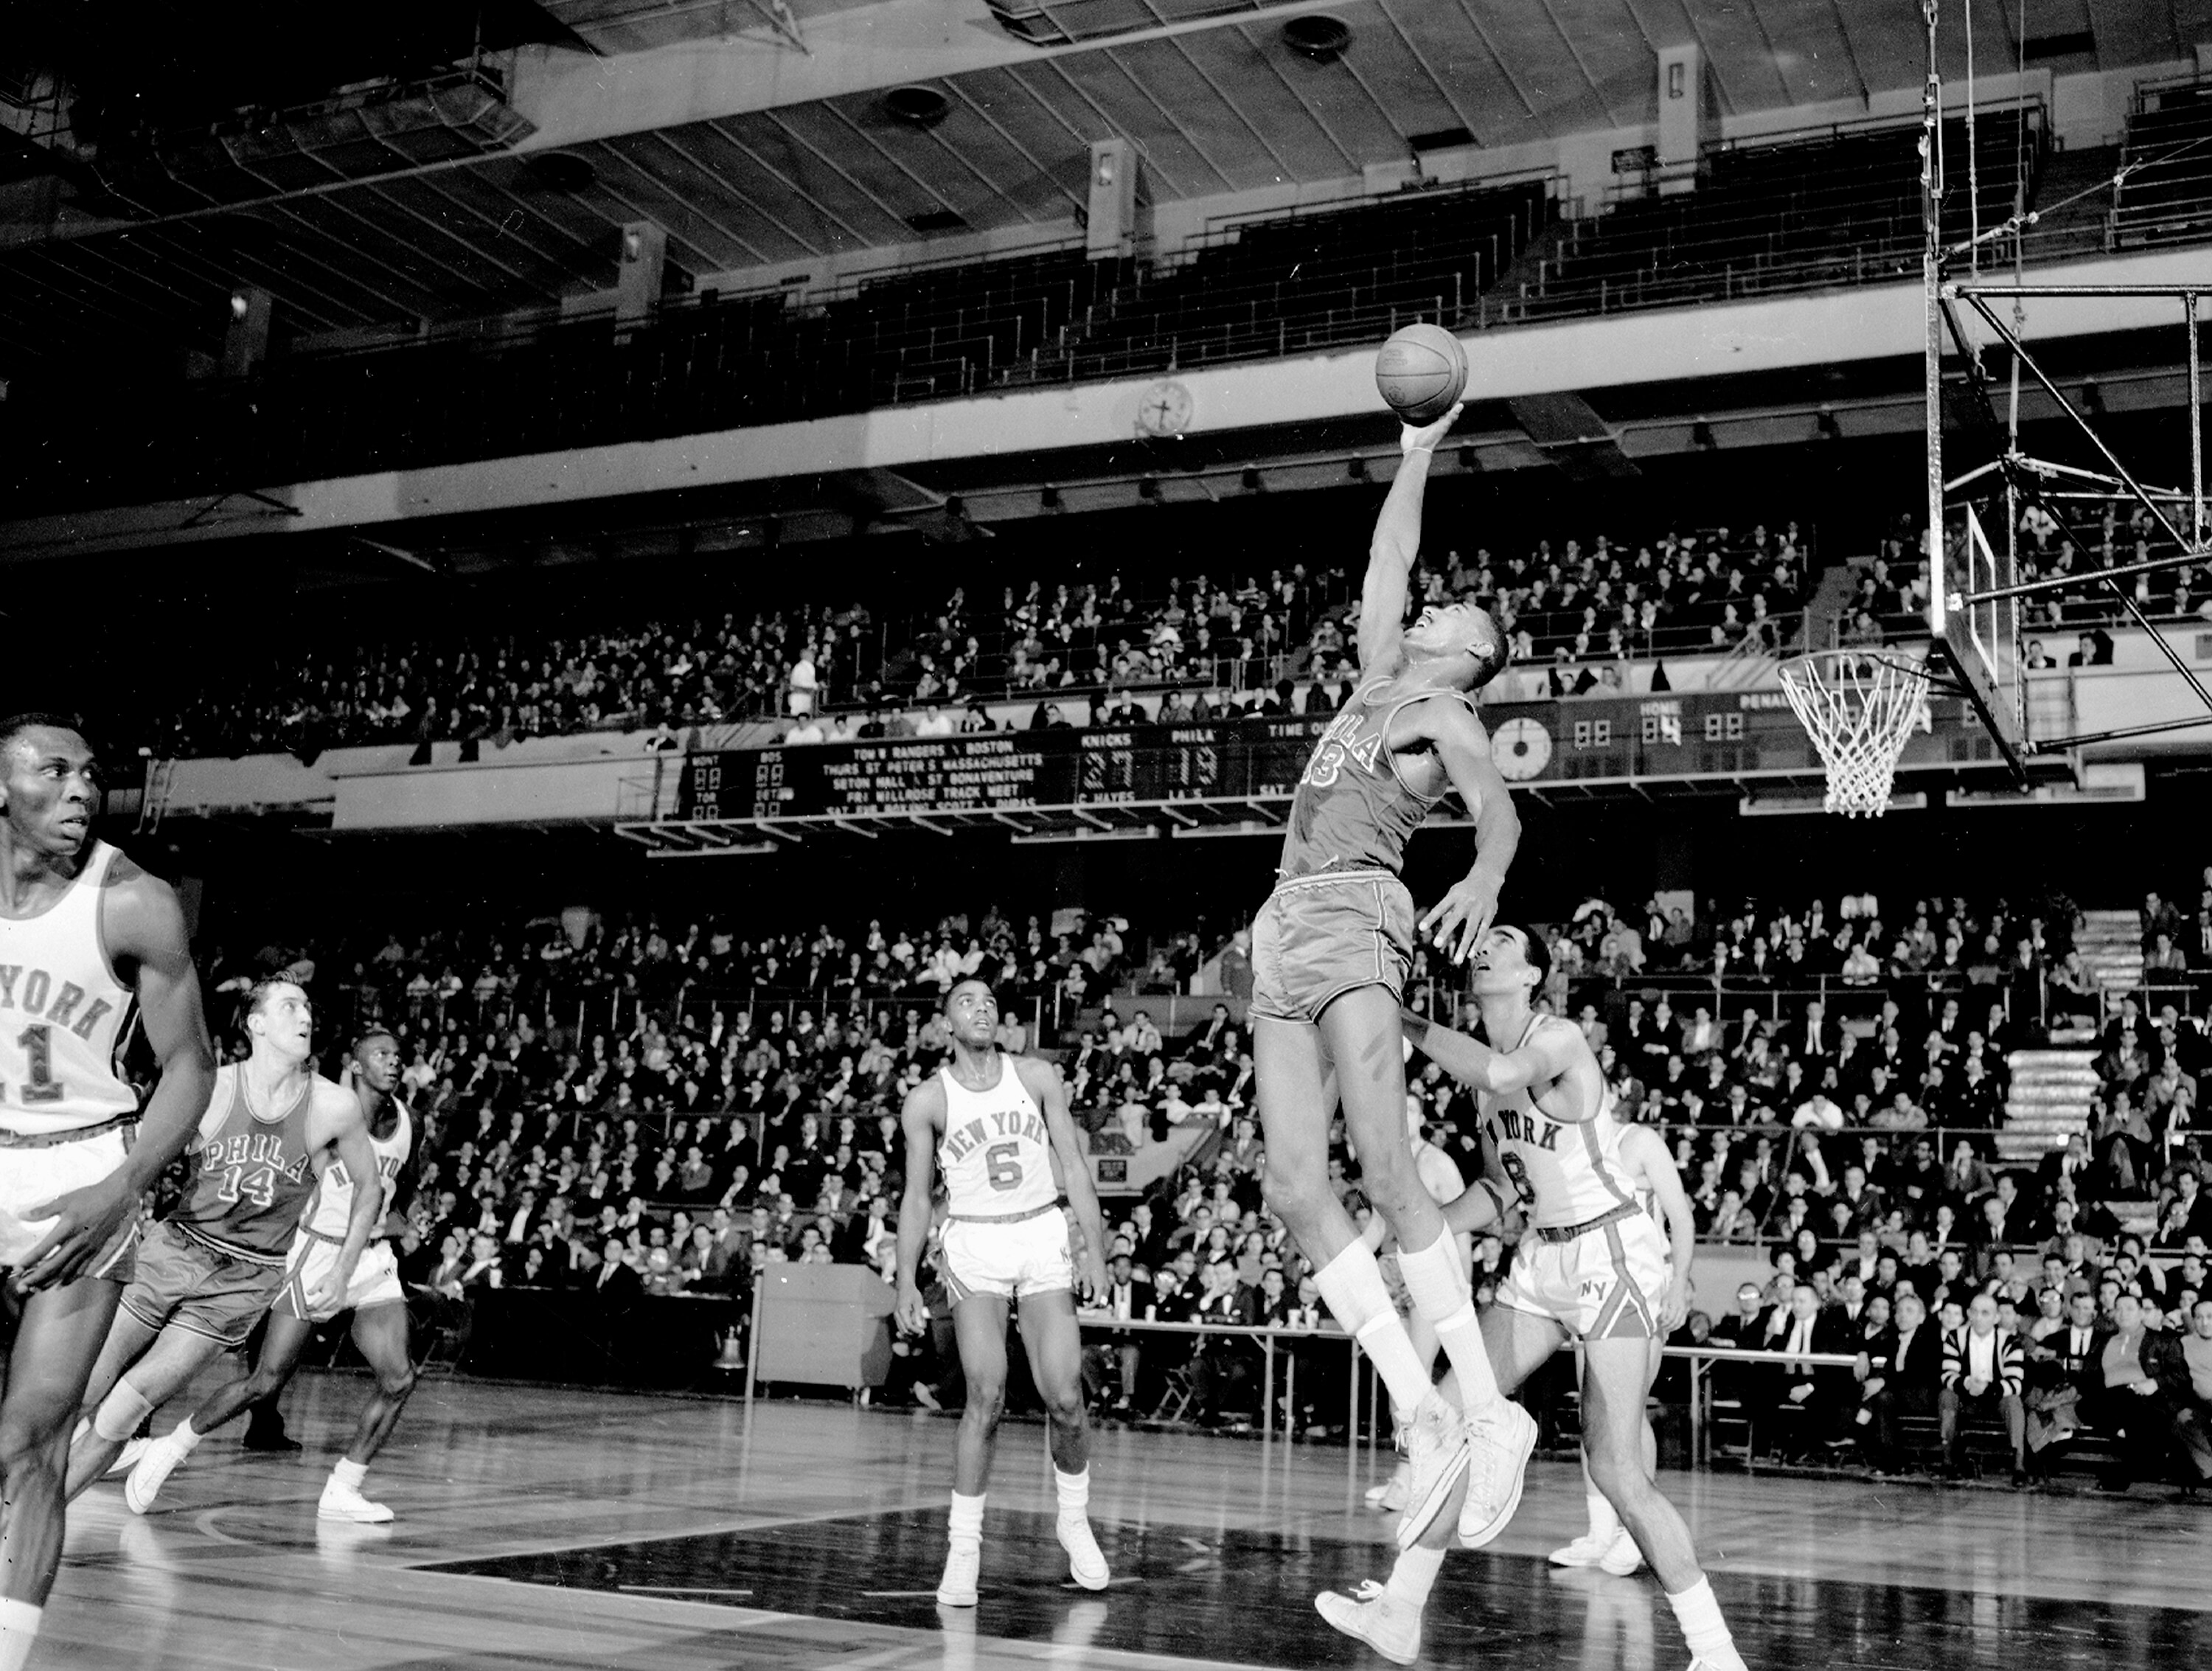 Wilt Chamberlain goes way up to pull down a rebound.